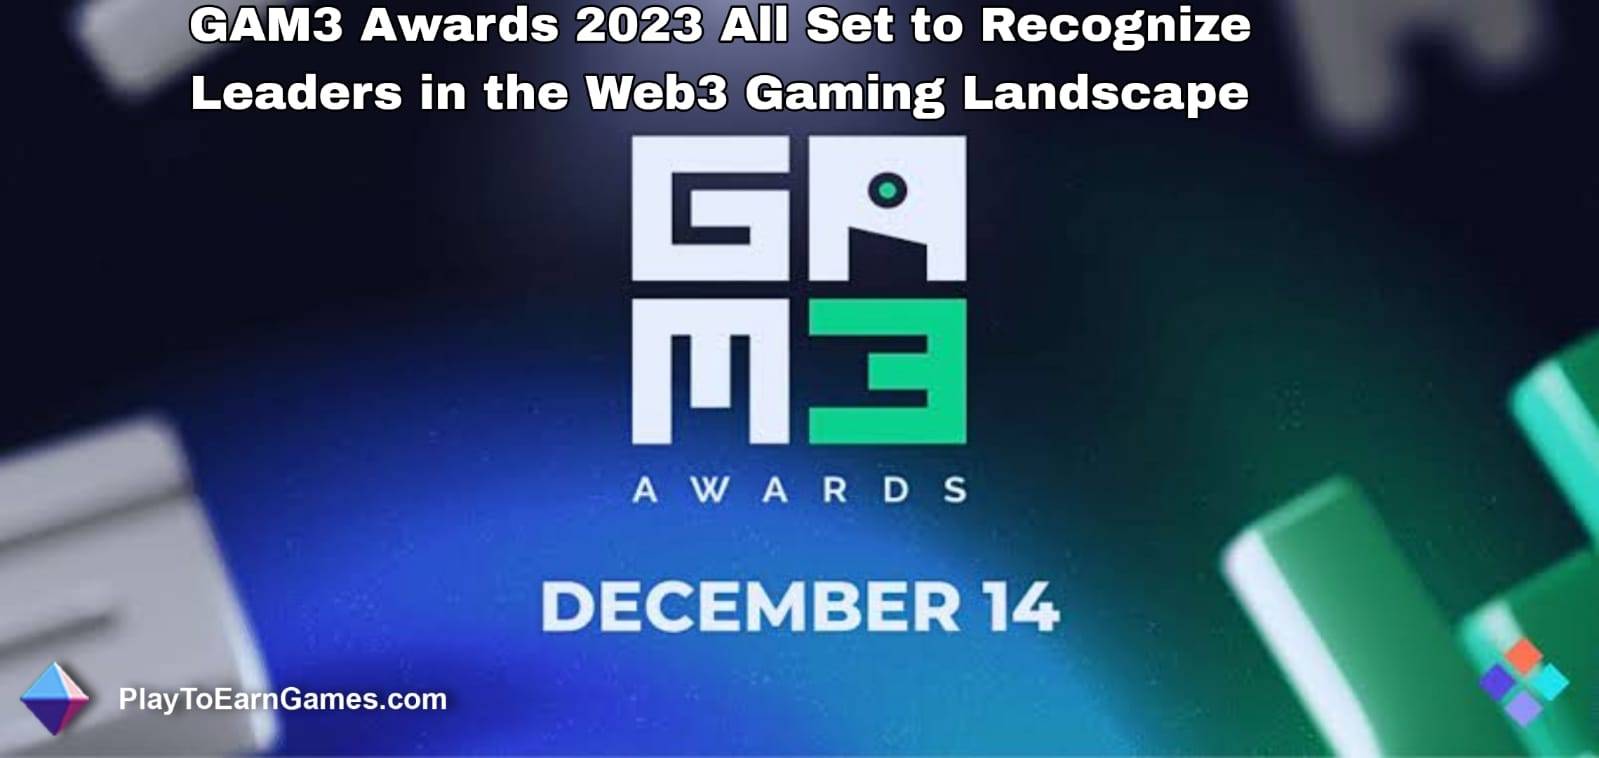 GAM3 Awards 2023 All Set to Recognize Leaders in the Web3 Gaming Landscape